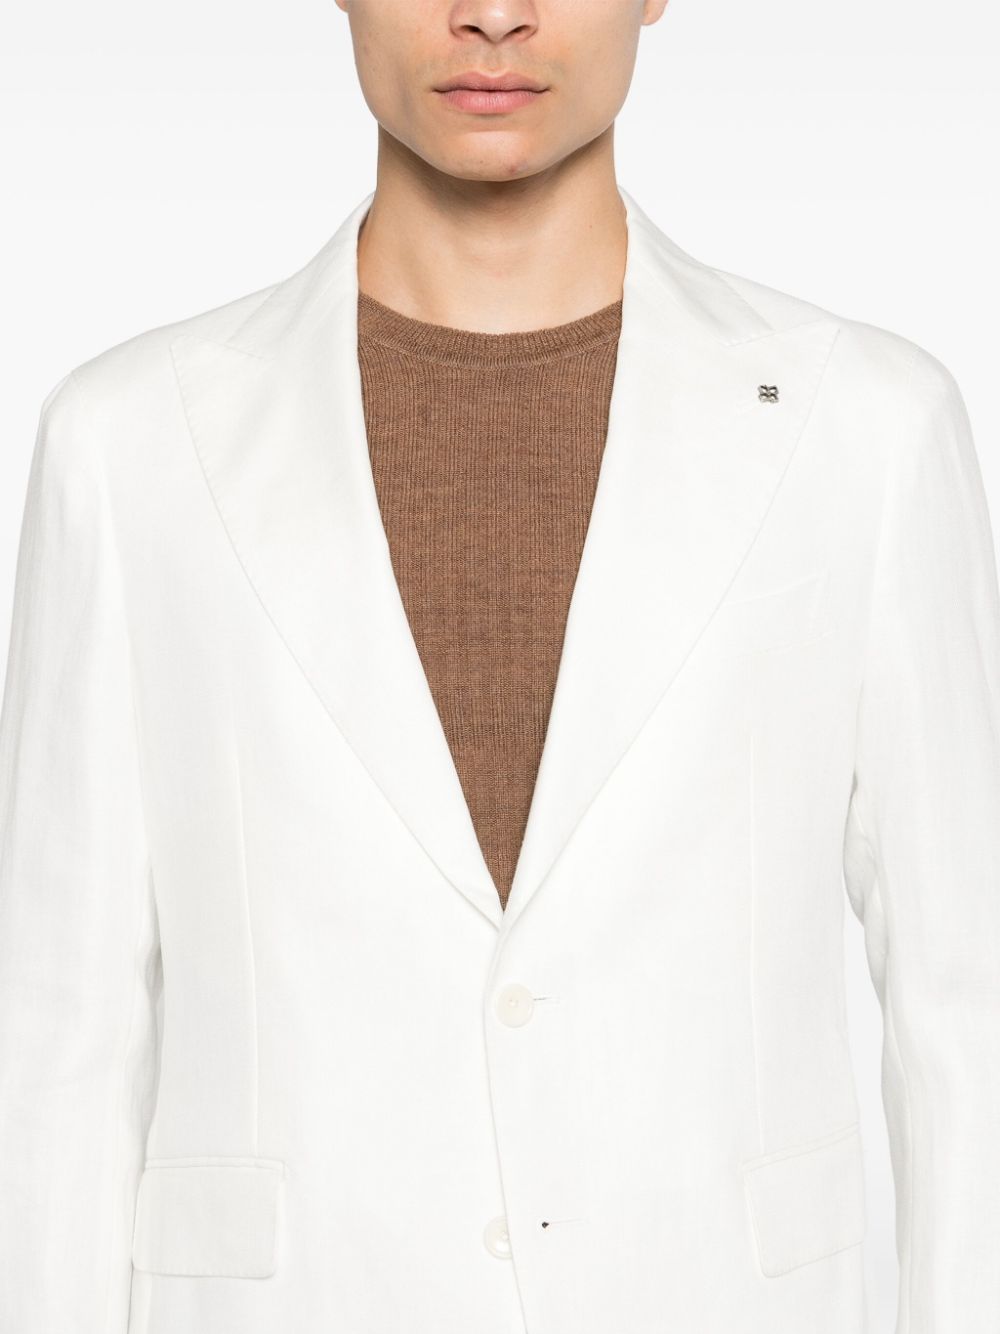 White linen single-breasted suit